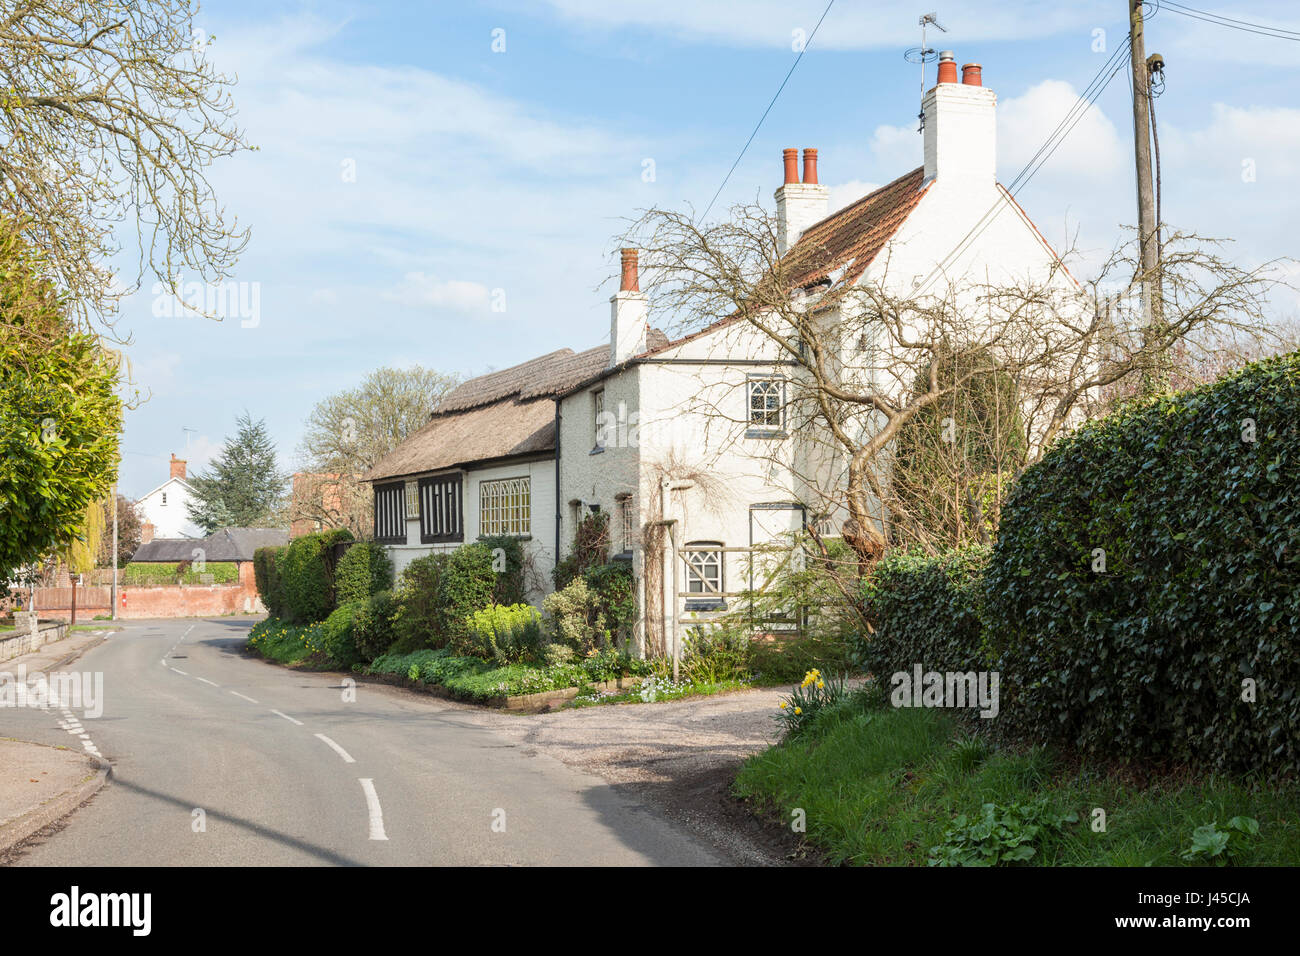 English village street with a cottage, in the rural Nottinghamshire village of Cropwell Butler, Nottinghamshire, England, UK Stock Photo